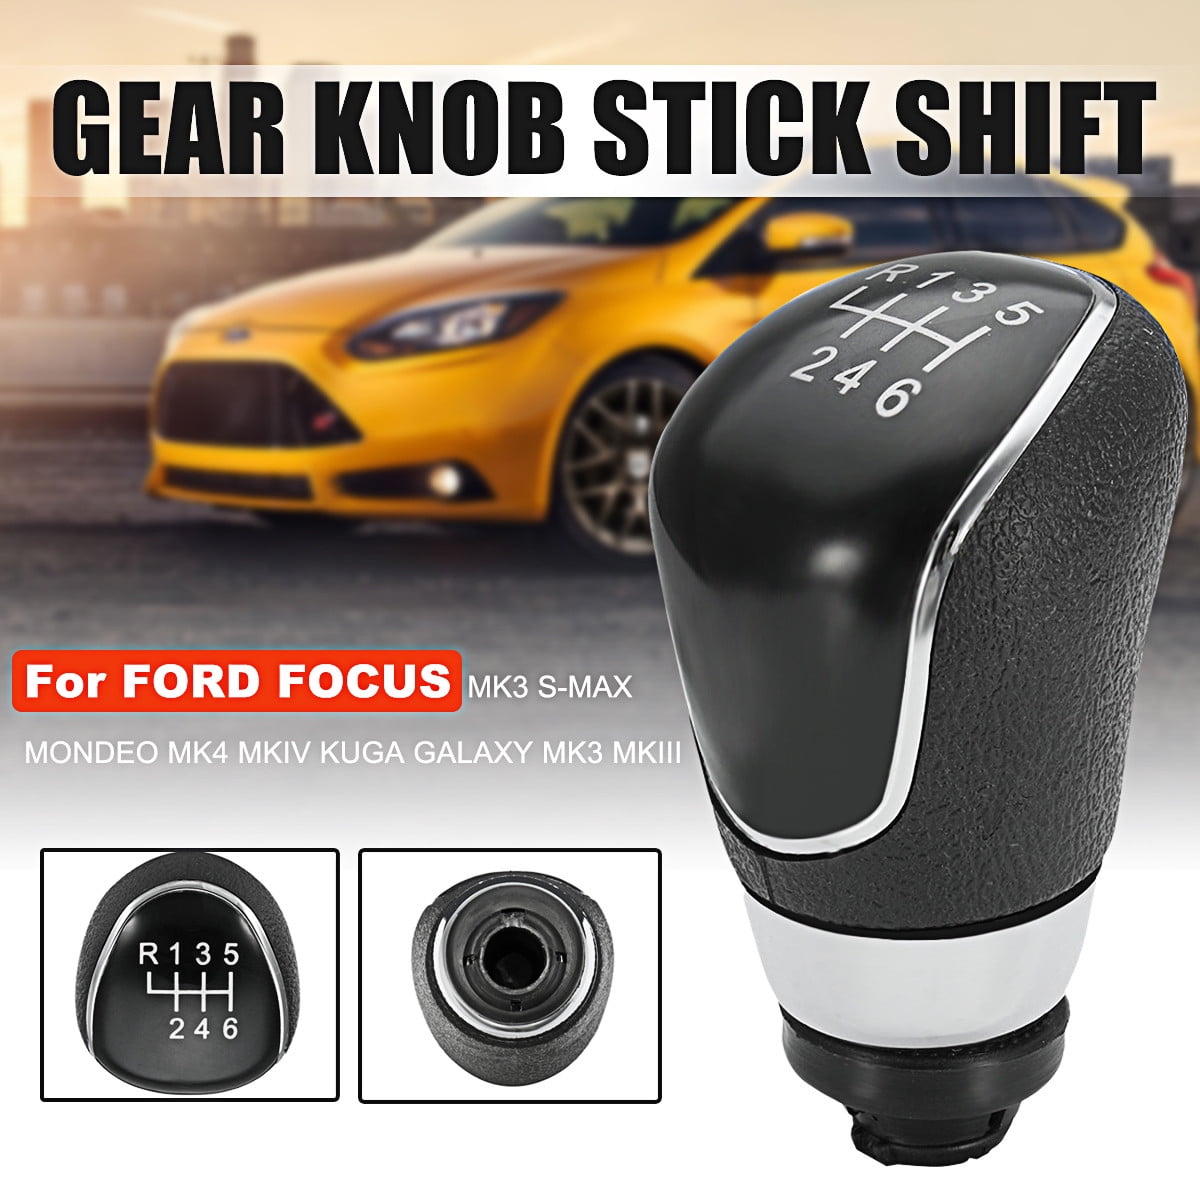 Y56 Replacement 6 Speed Gear Shift Knob for Ford Focus MK MK7 C-max Mondeo Black